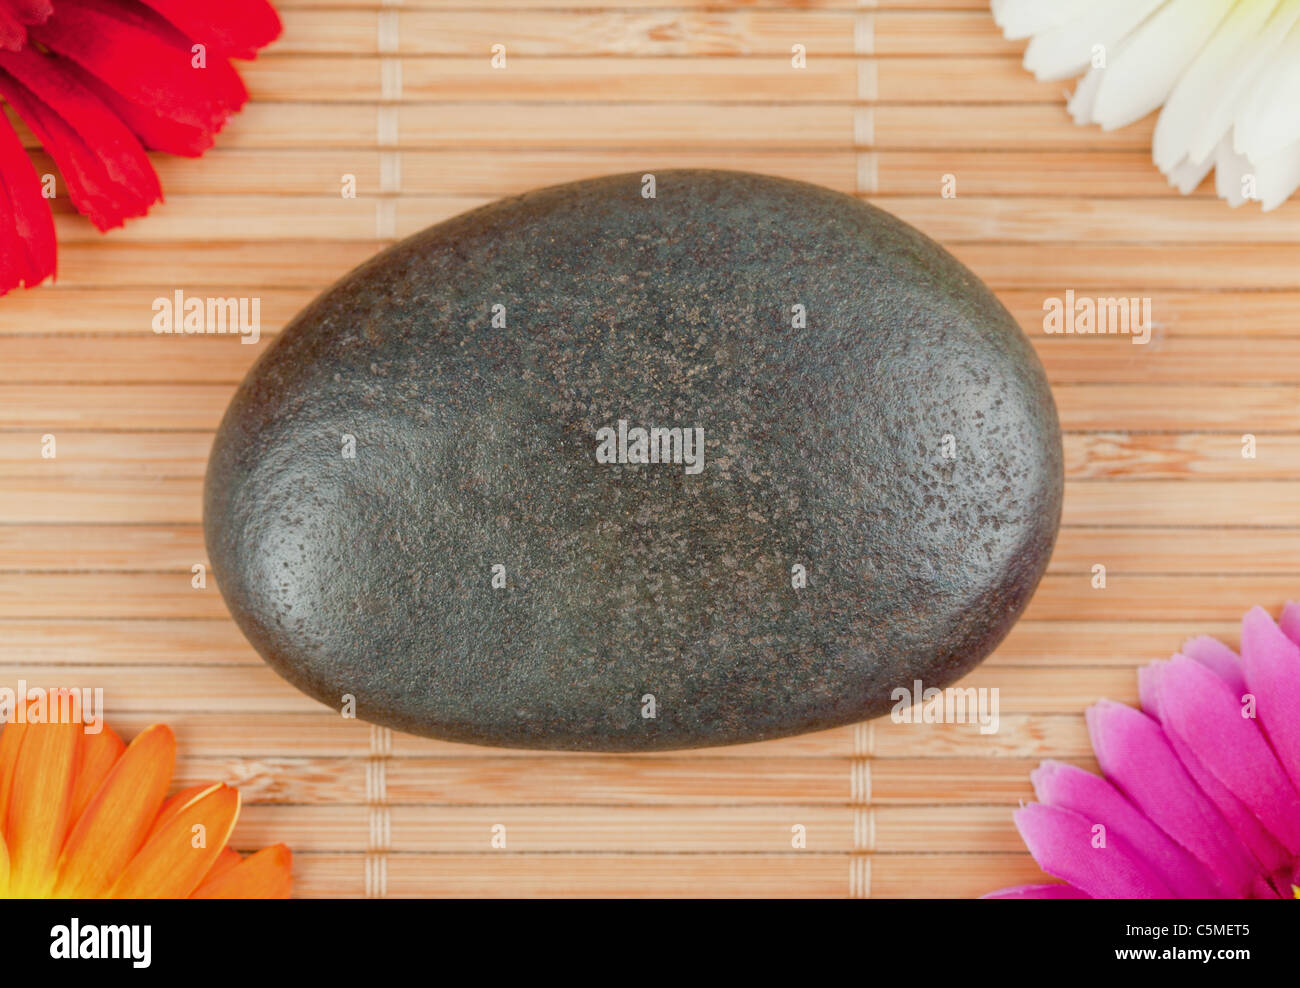 Round smooth pebble surrounded by colourfull gerberas Stock Photo